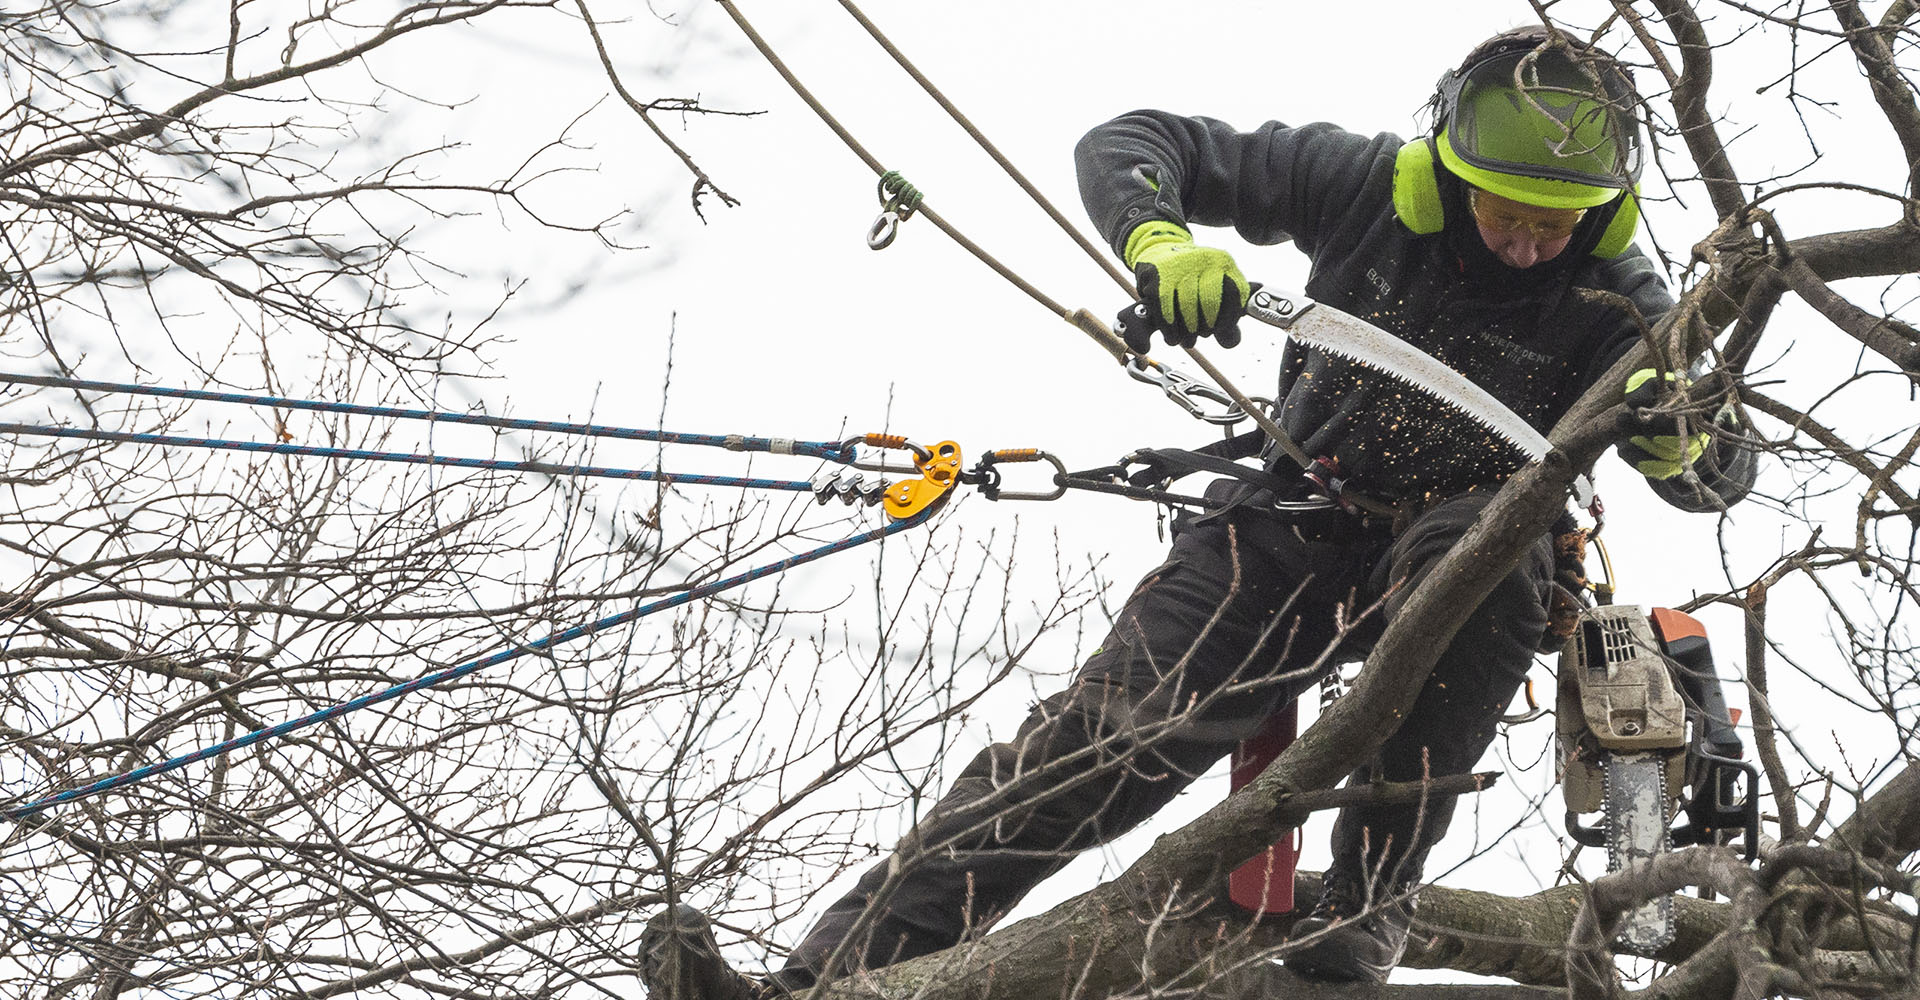 Independent Tree arborist doing dormant pruning in a tree